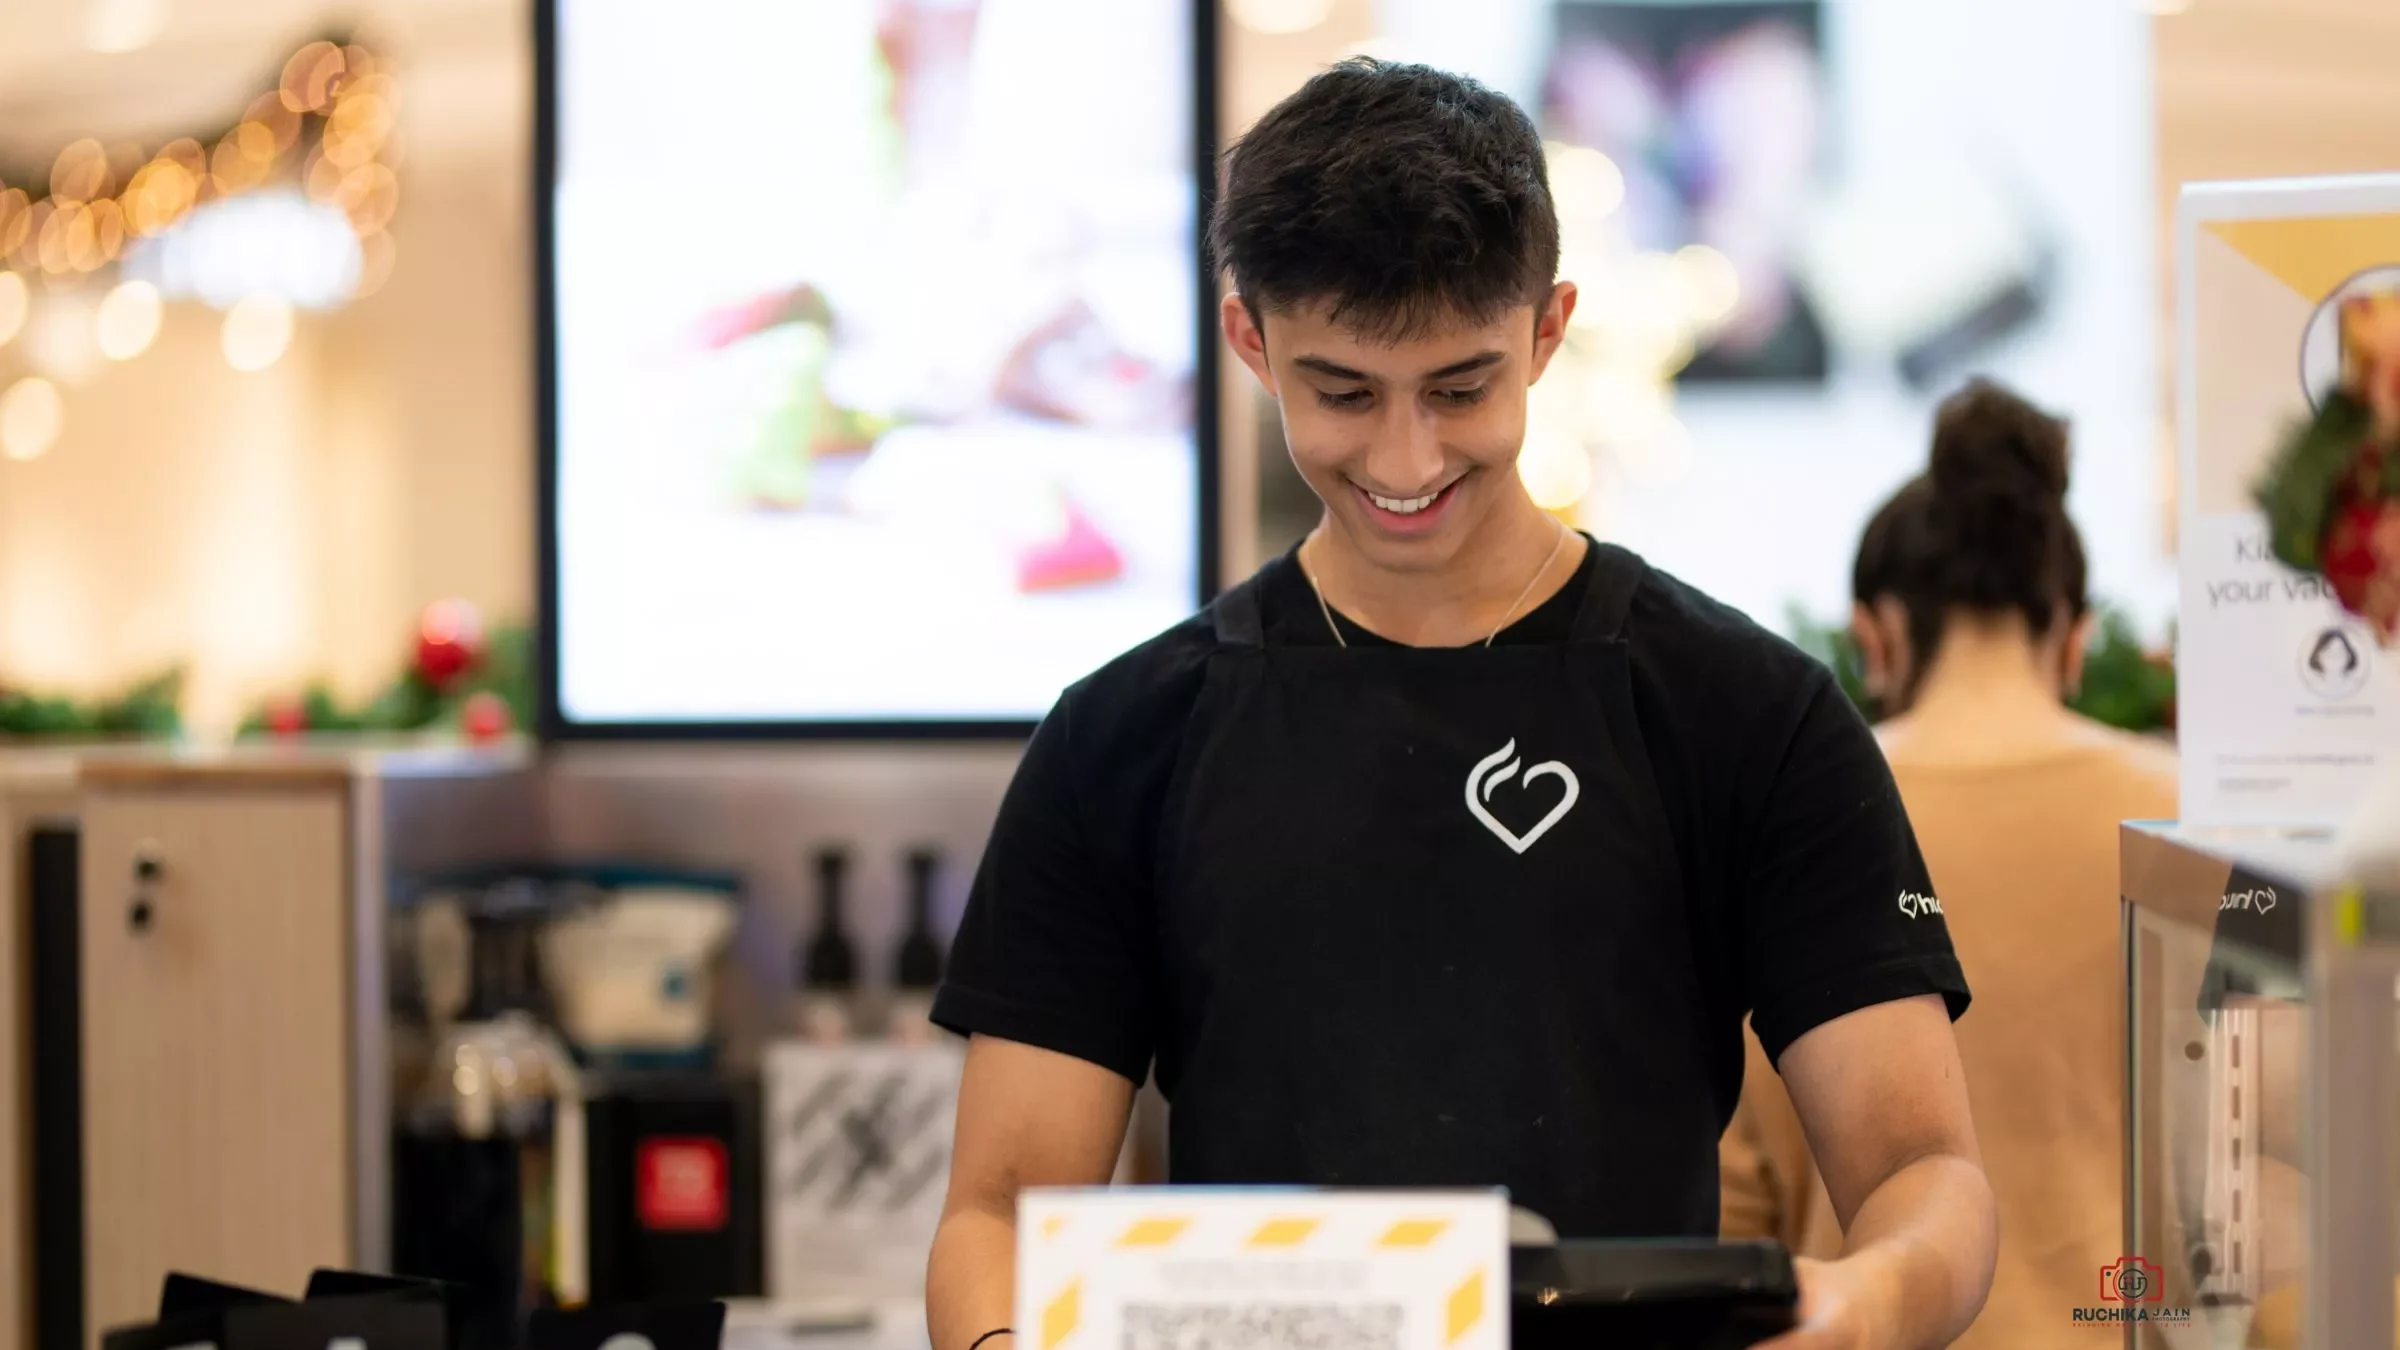 Dedicated Hudsons restaurant worker wearing a black T-shirt with the Hudsons logo, working at the billing counter